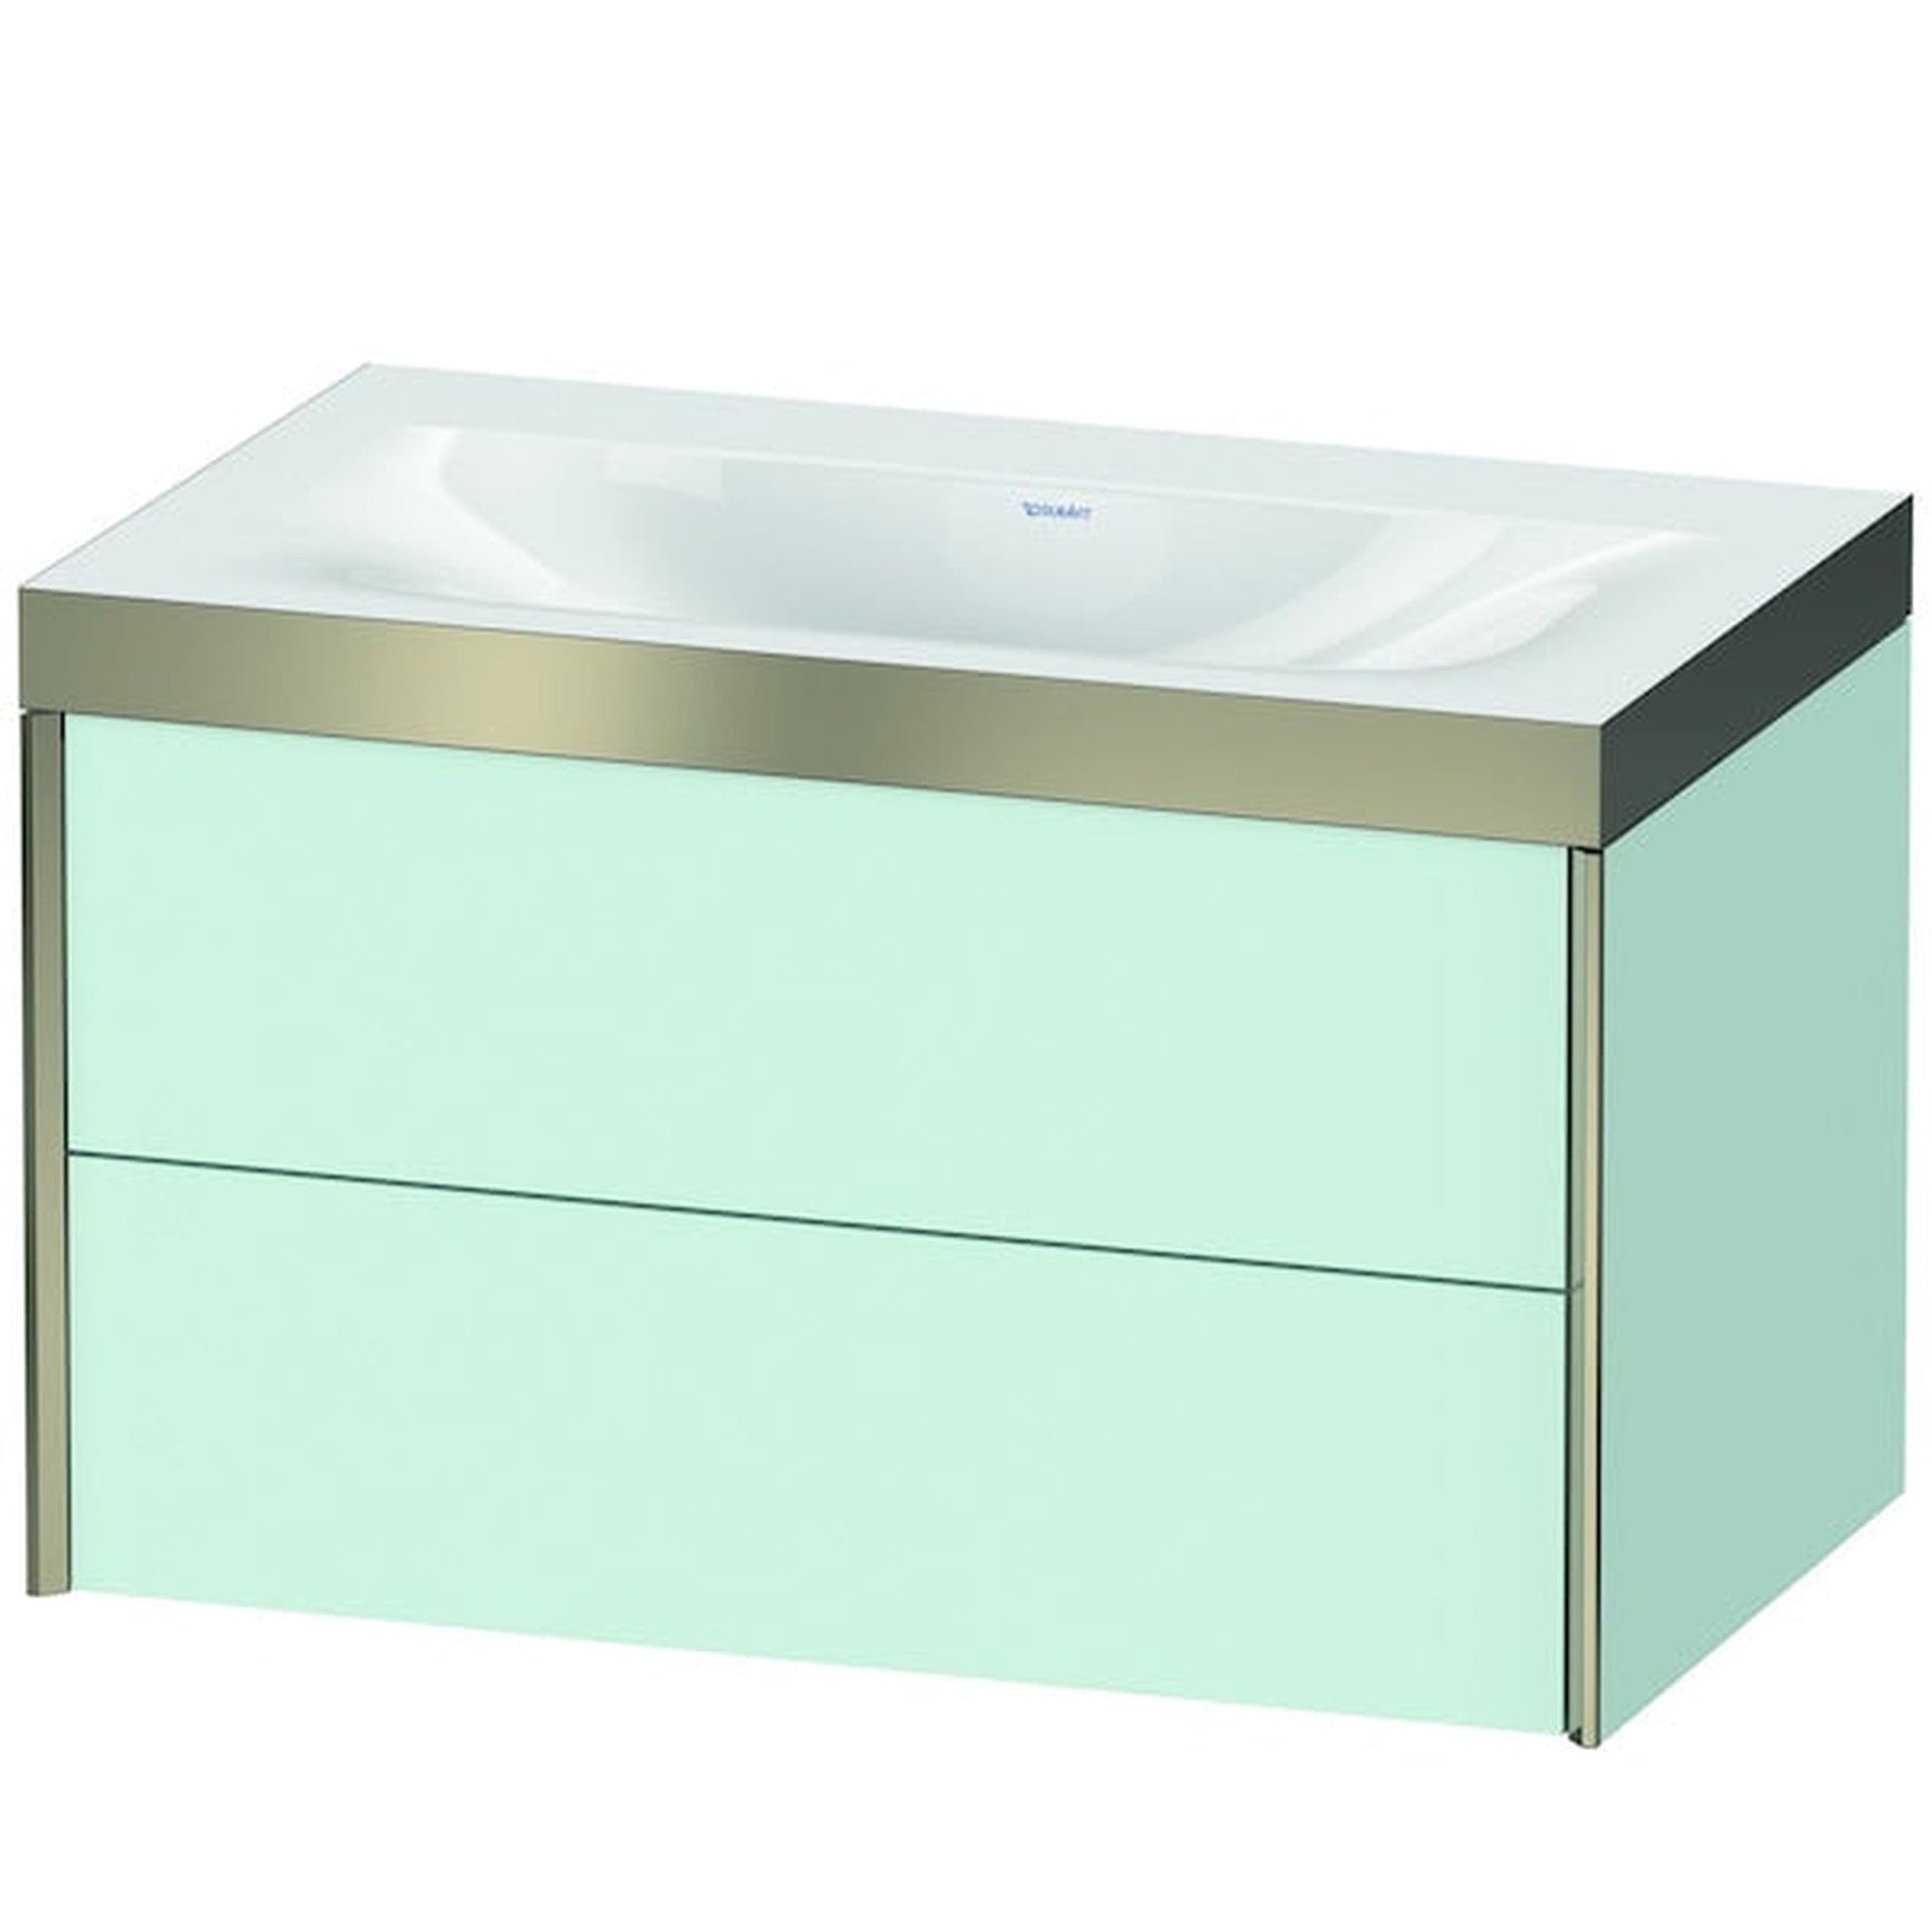 Duravit Xviu 31" x 20" x 19" Two Drawer C-Bonded Wall-Mount Vanity Kit Without Tap Hole, Light Blue (XV4615NB109P)